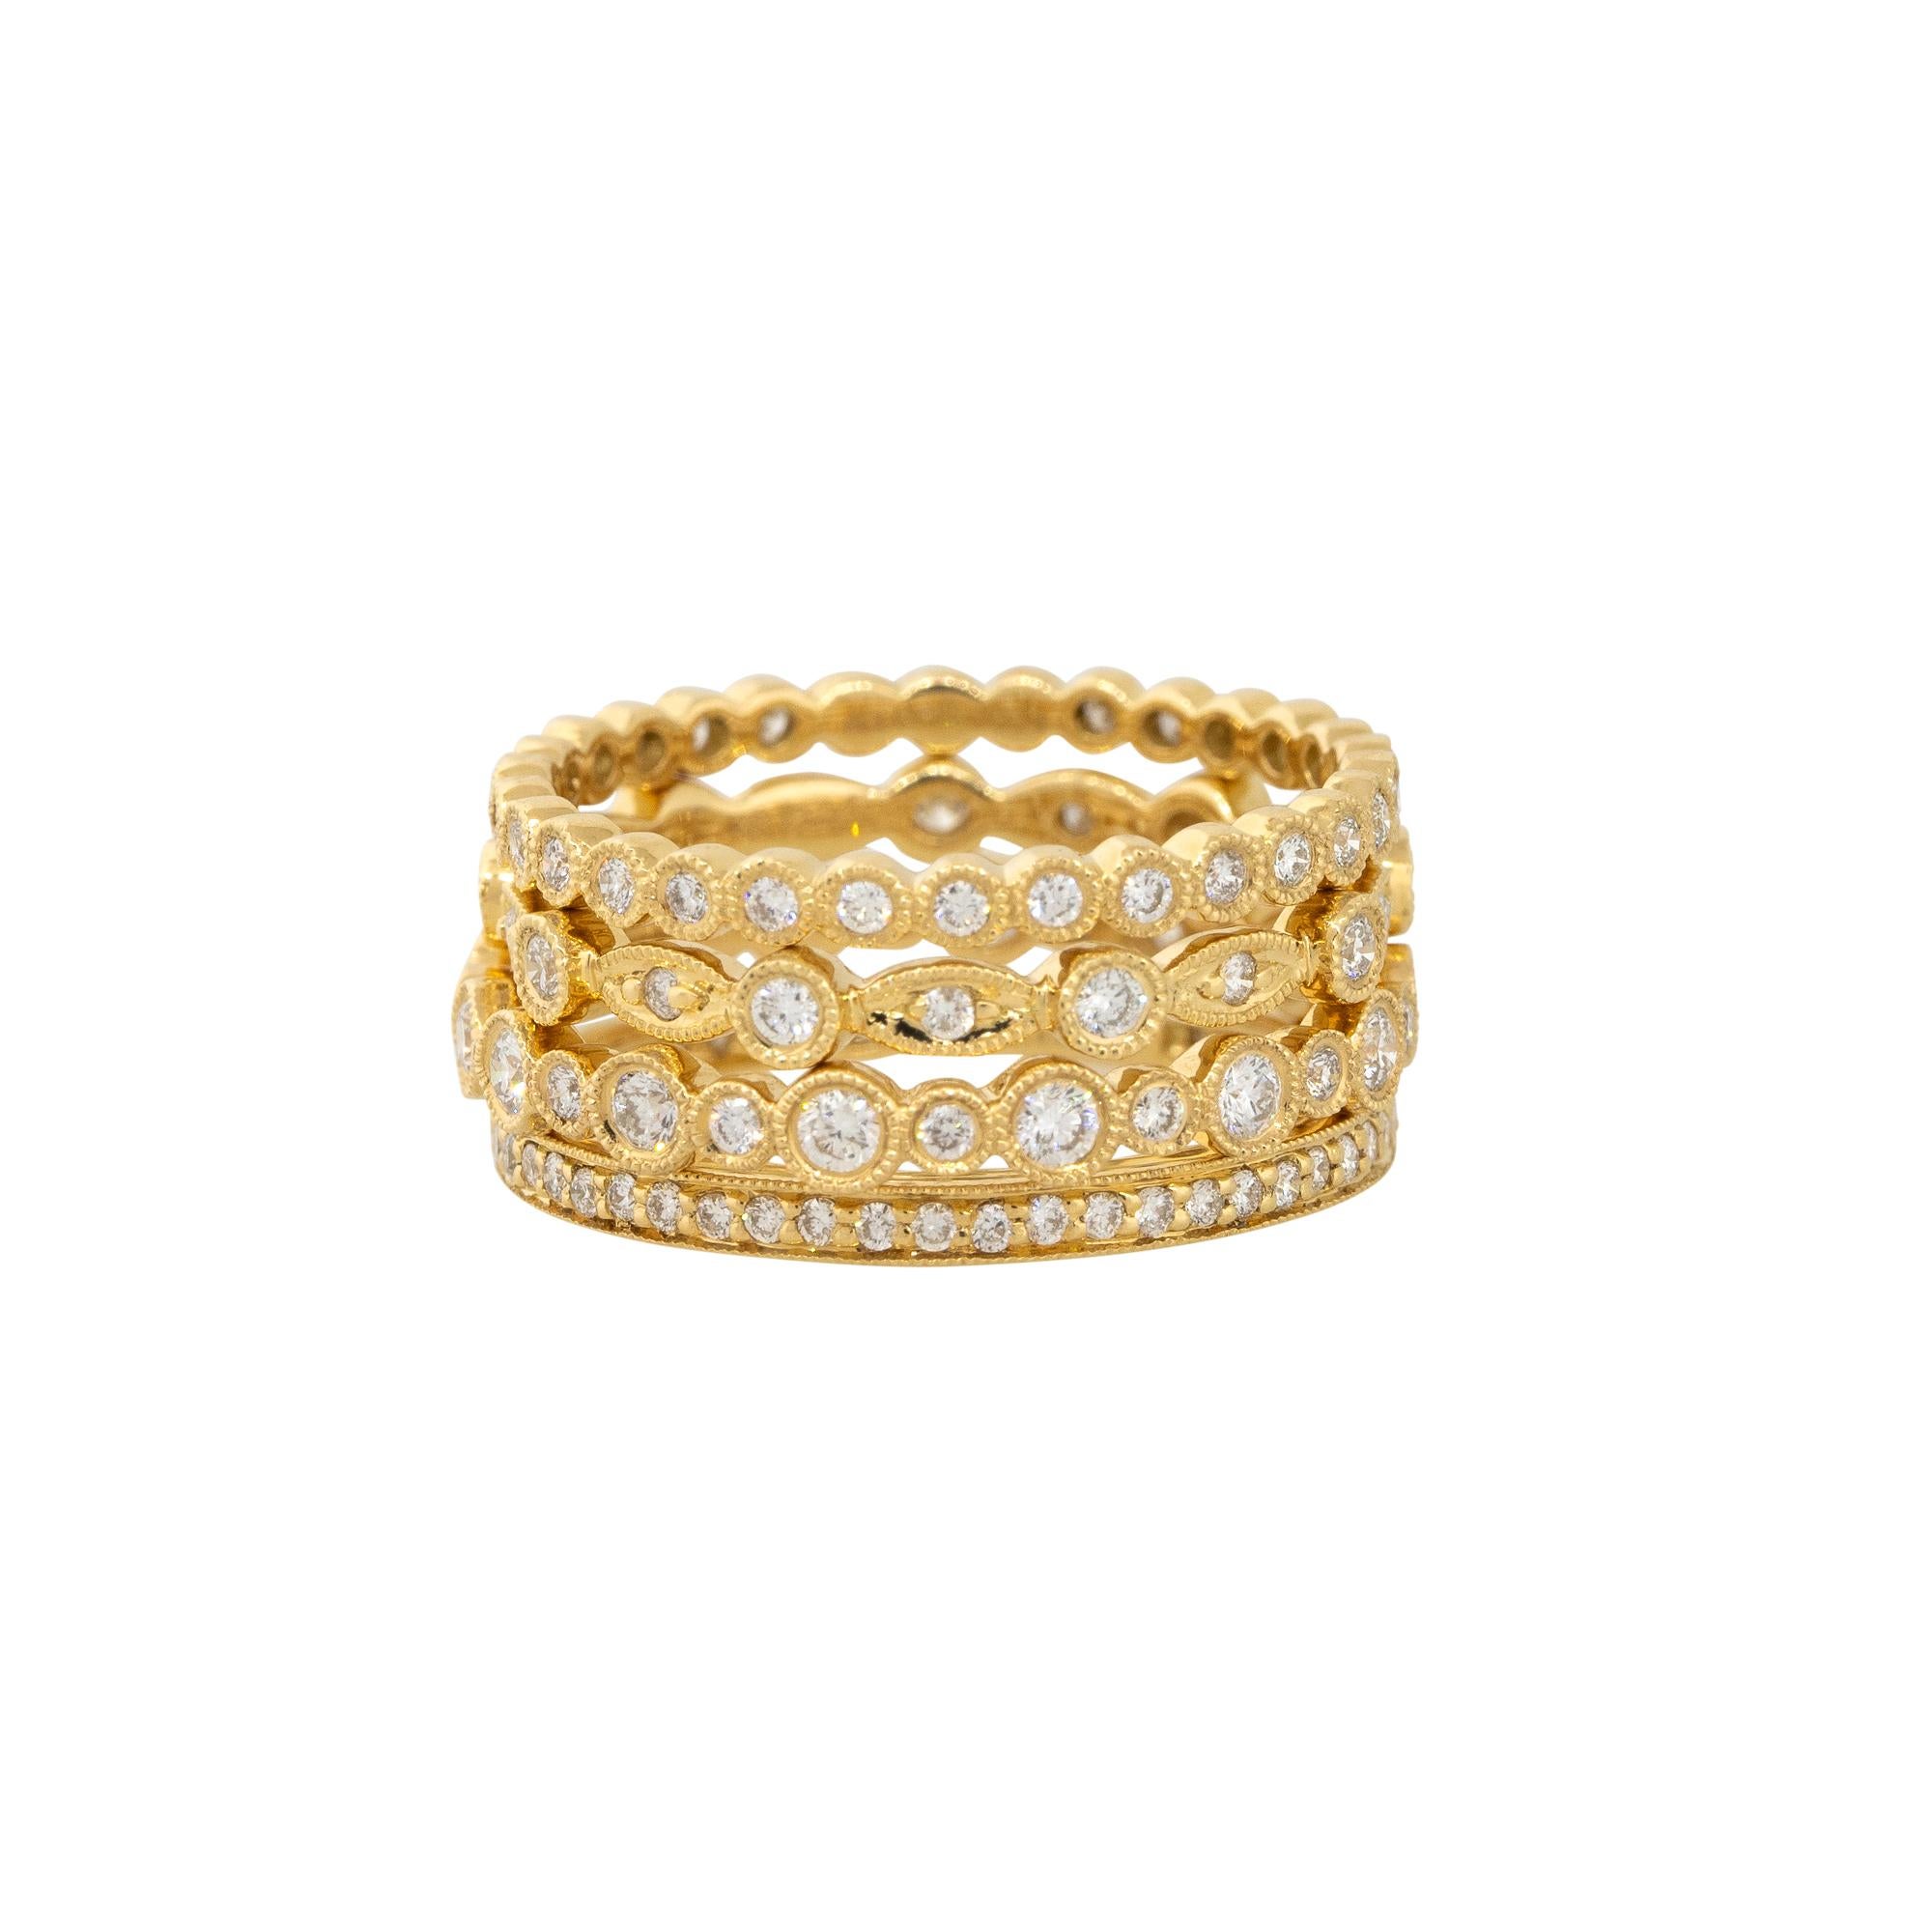 18k Yellow Gold 1.11ctw Diamond Set of 4 Stackable Rings
Style: Women's Diamond Stackable Rings (4)
Material: 18k Yellow Gold
Diamond Details: Approximately 1.11ctw of Round Brilliant Cut Diamonds in the set of 4 rings. There are 122 stones